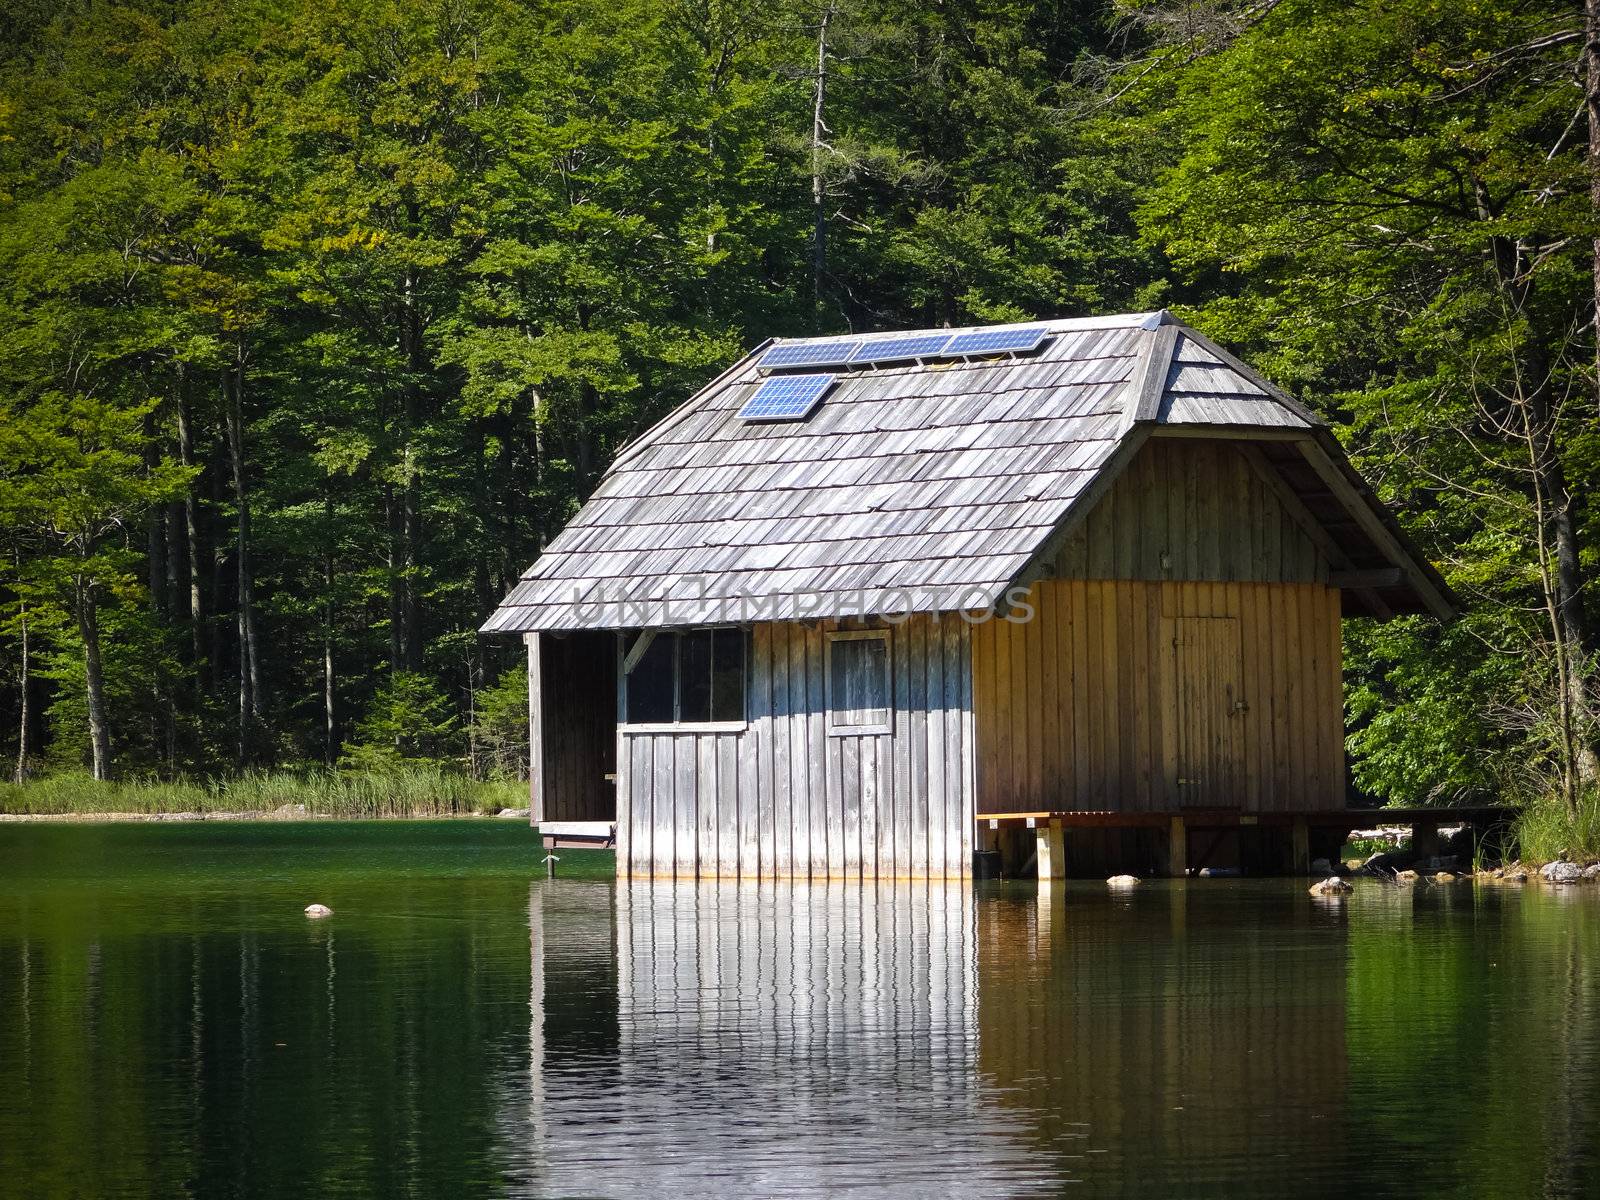 Fishing lodge with Solar array by Mbatelier